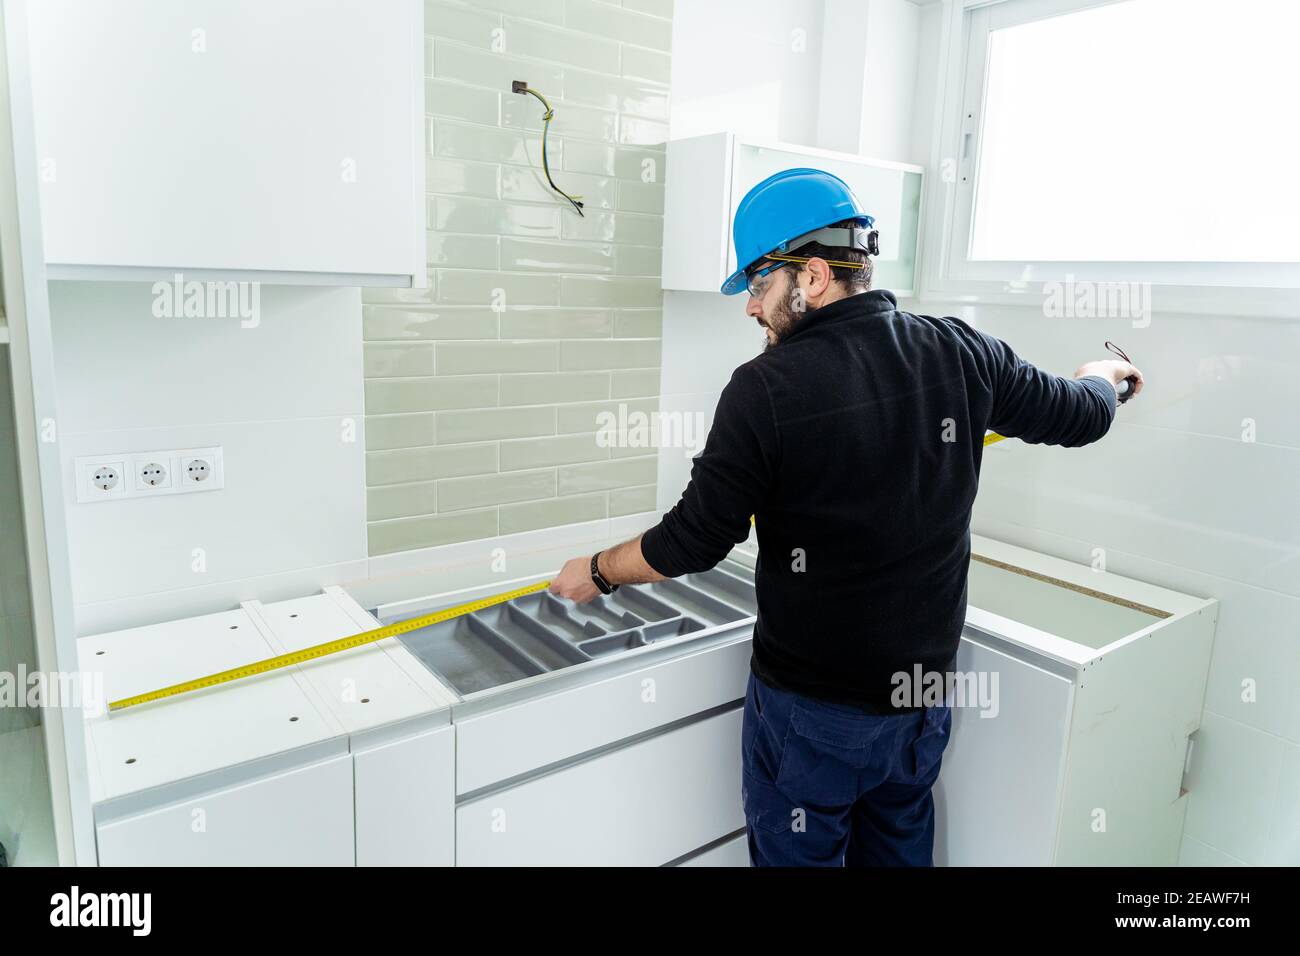 Worker taking measurement of a kitchen that he is assembling Stock Photo